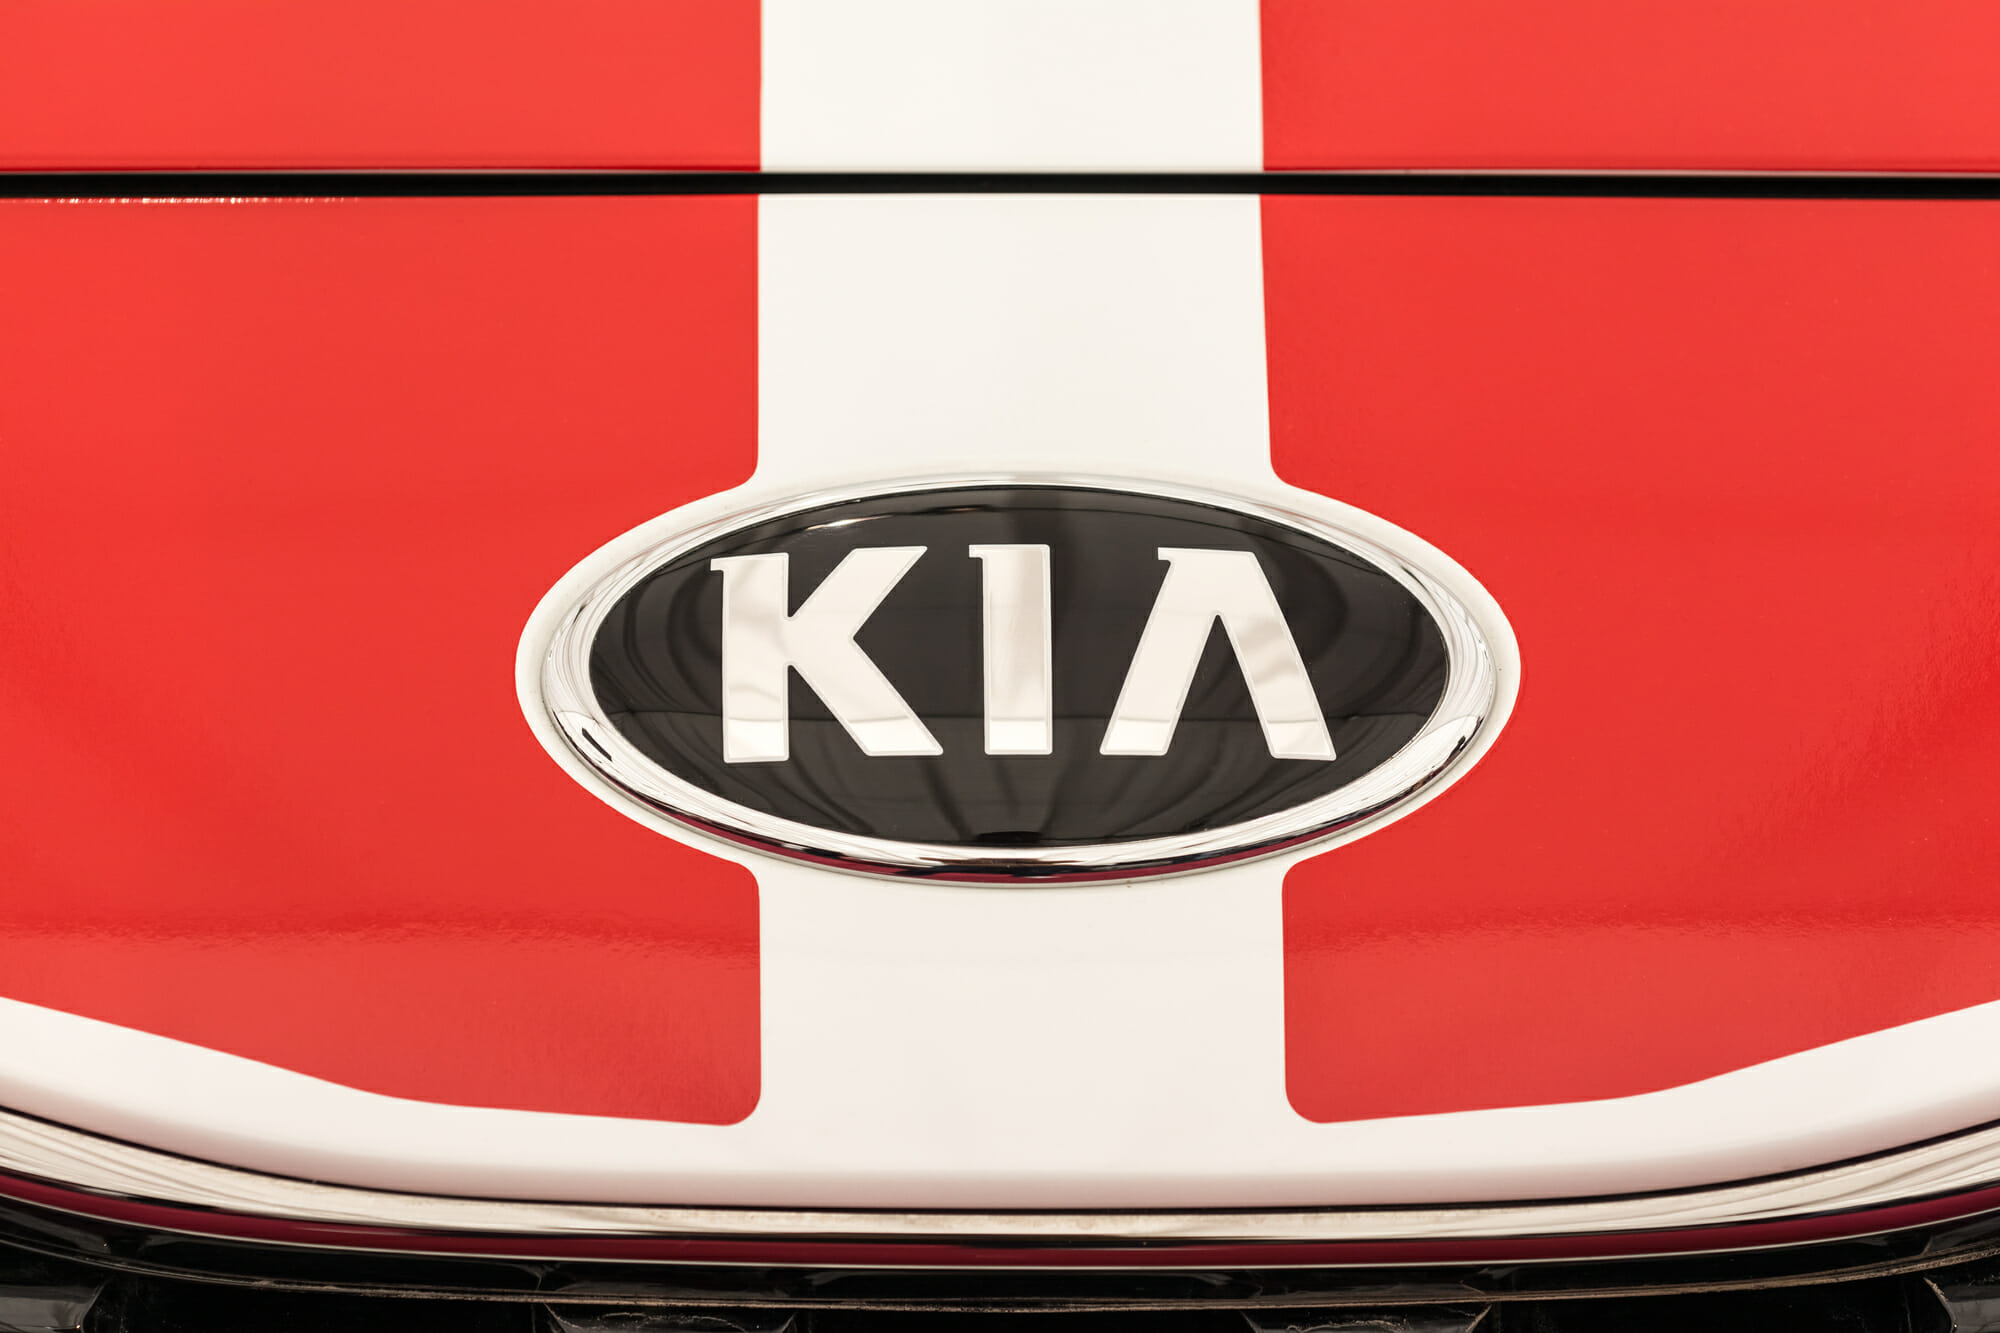 Kia Models 2020: Everything You Need to Know